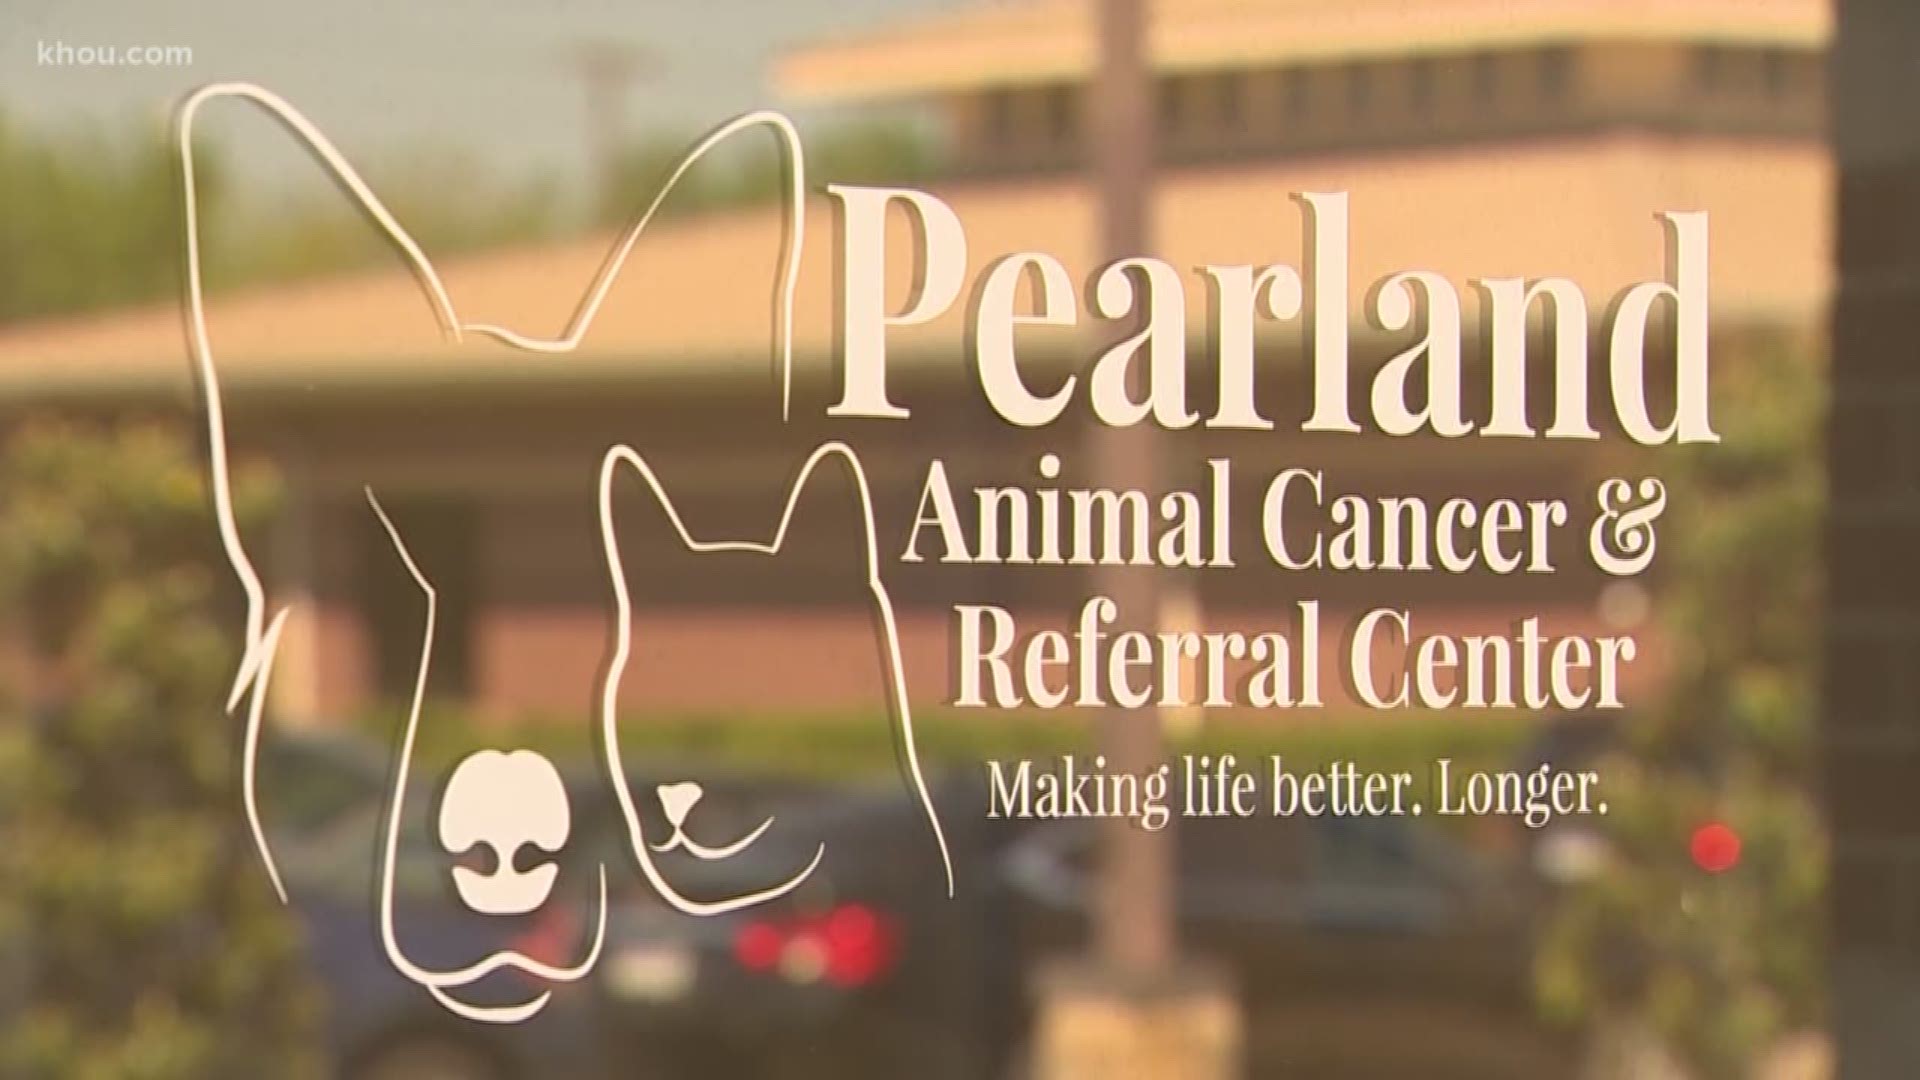 Pearland Animal Cancer & Referral Center opened less than two months ago and offers medical services previously unavailable to many pet owners in the area.